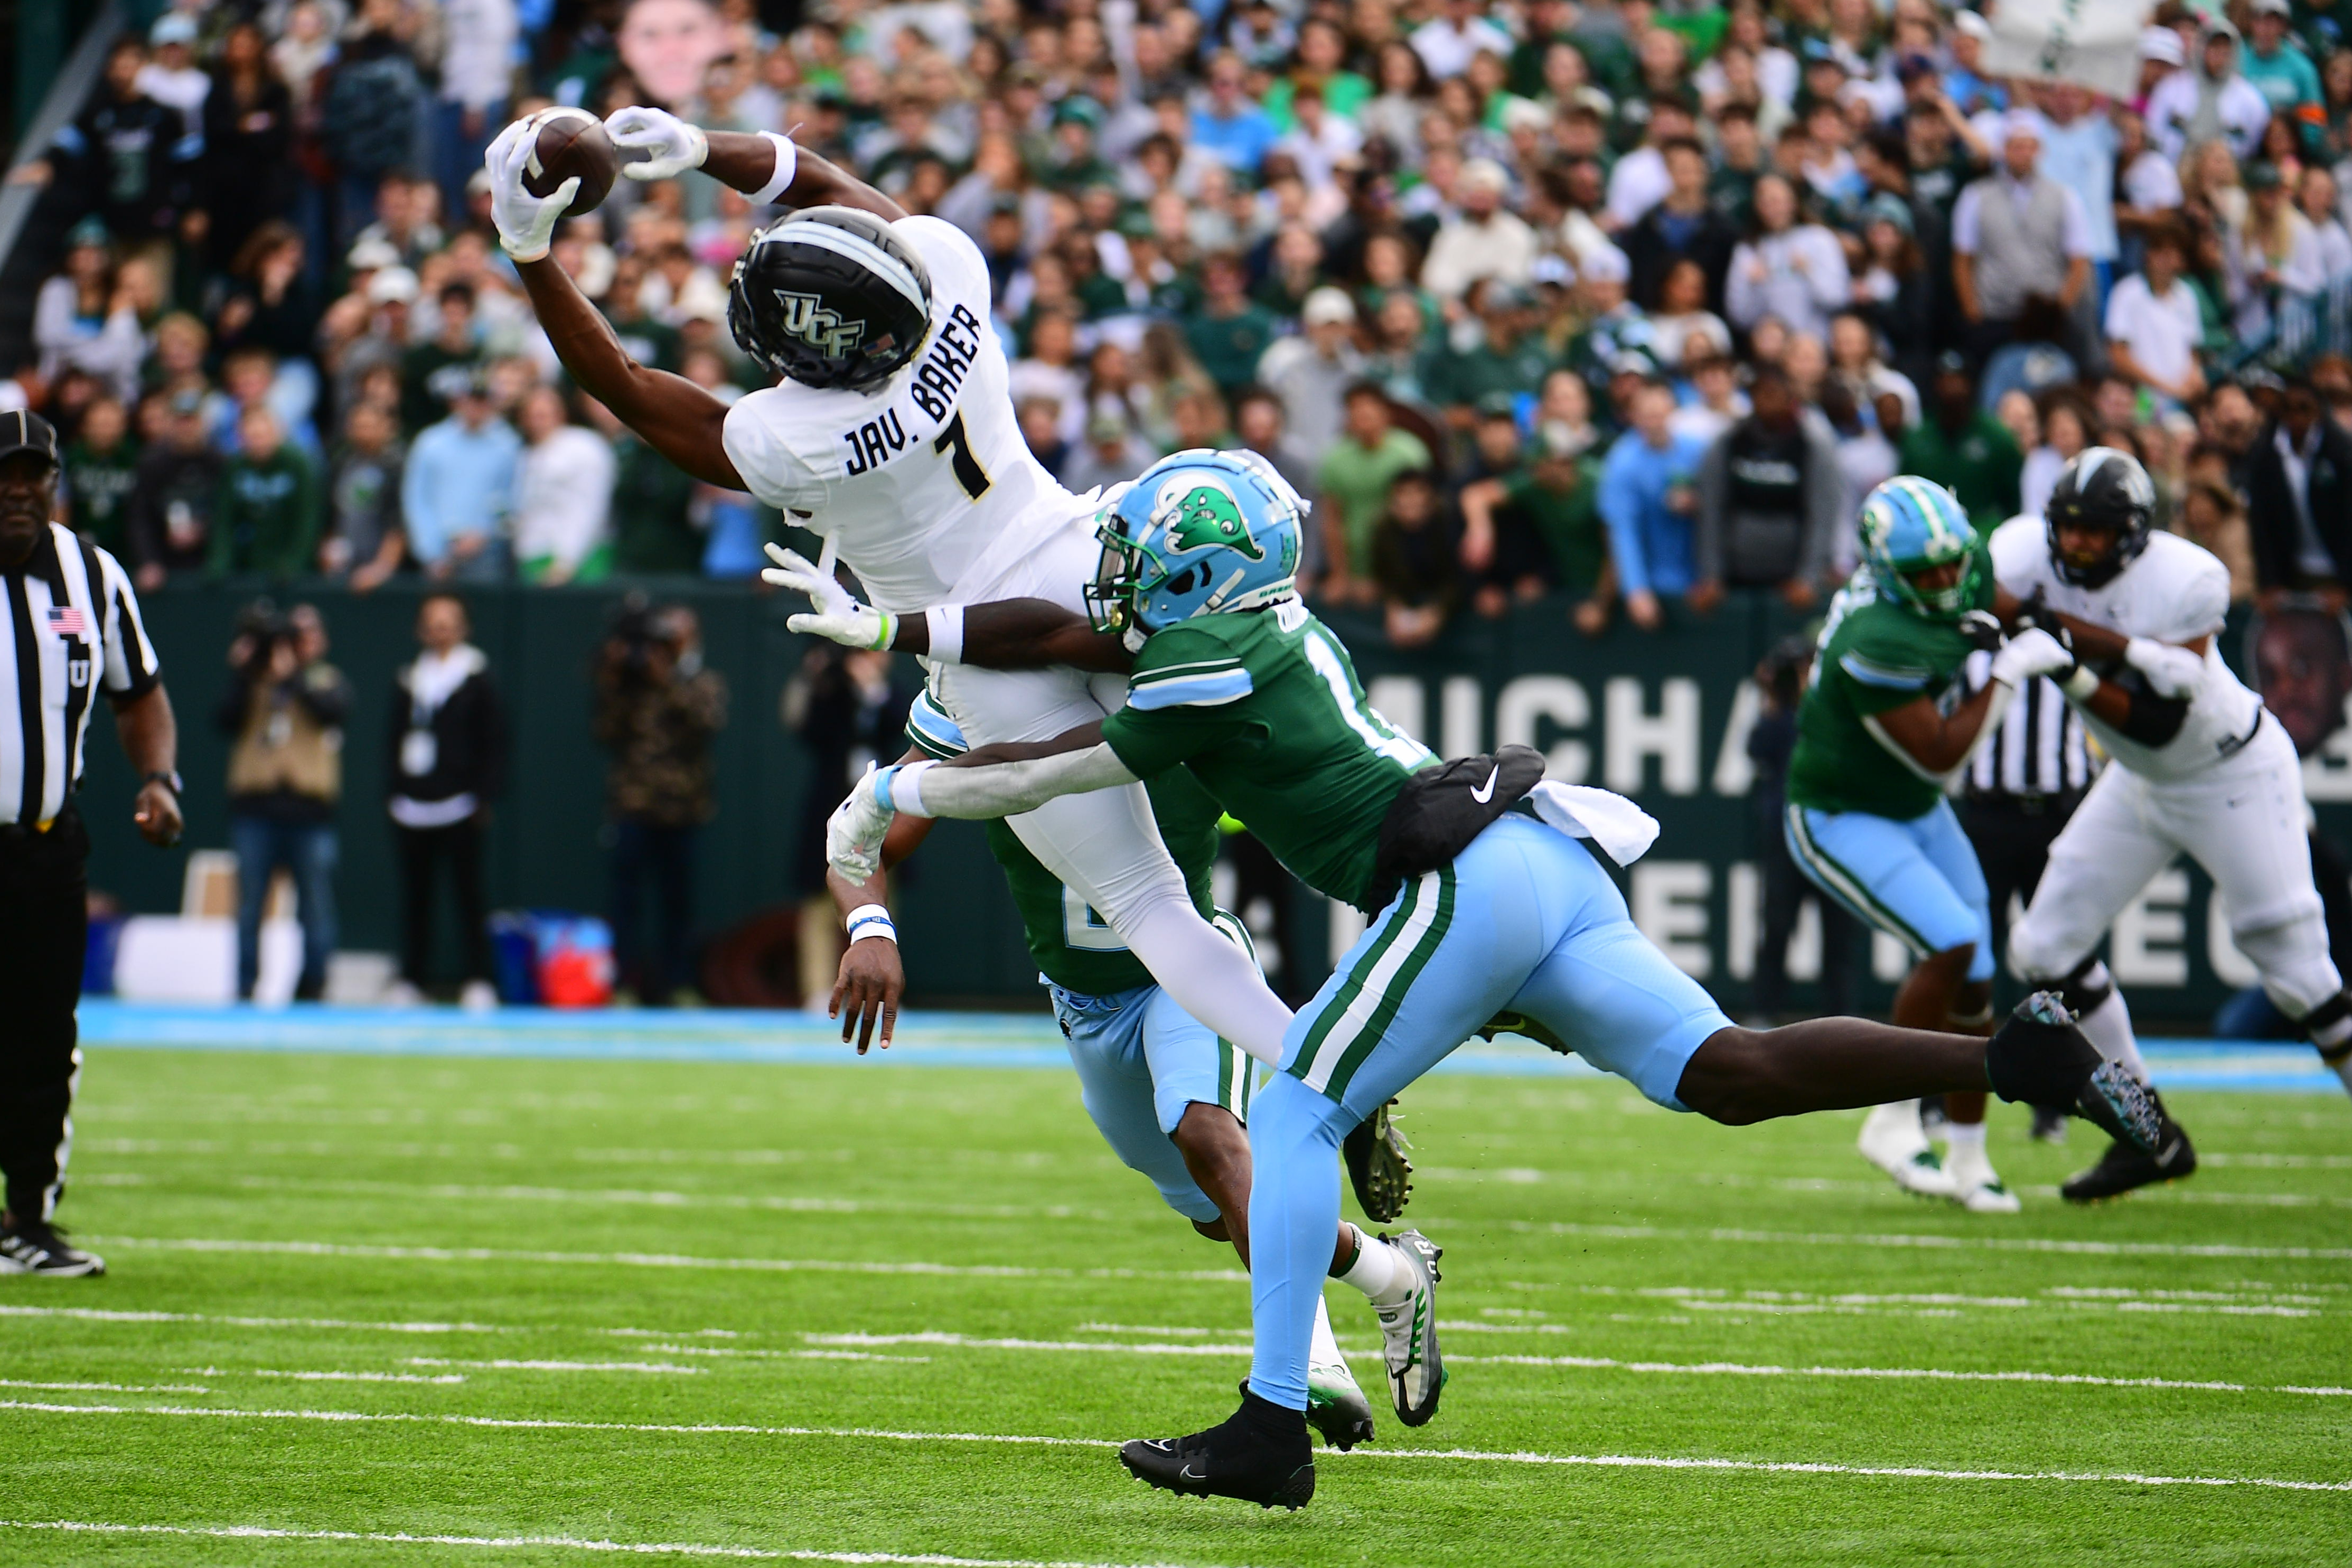 Nov 12, 2022; New Orleans, Louisiana, USA; UCF Knights wide receiver Javon Baker (1) receives a pass during the first quarter against the Tulane Green Wave at Yulman Stadium. Mandatory Credit: Rebecca Warren-USA TODAY Sports